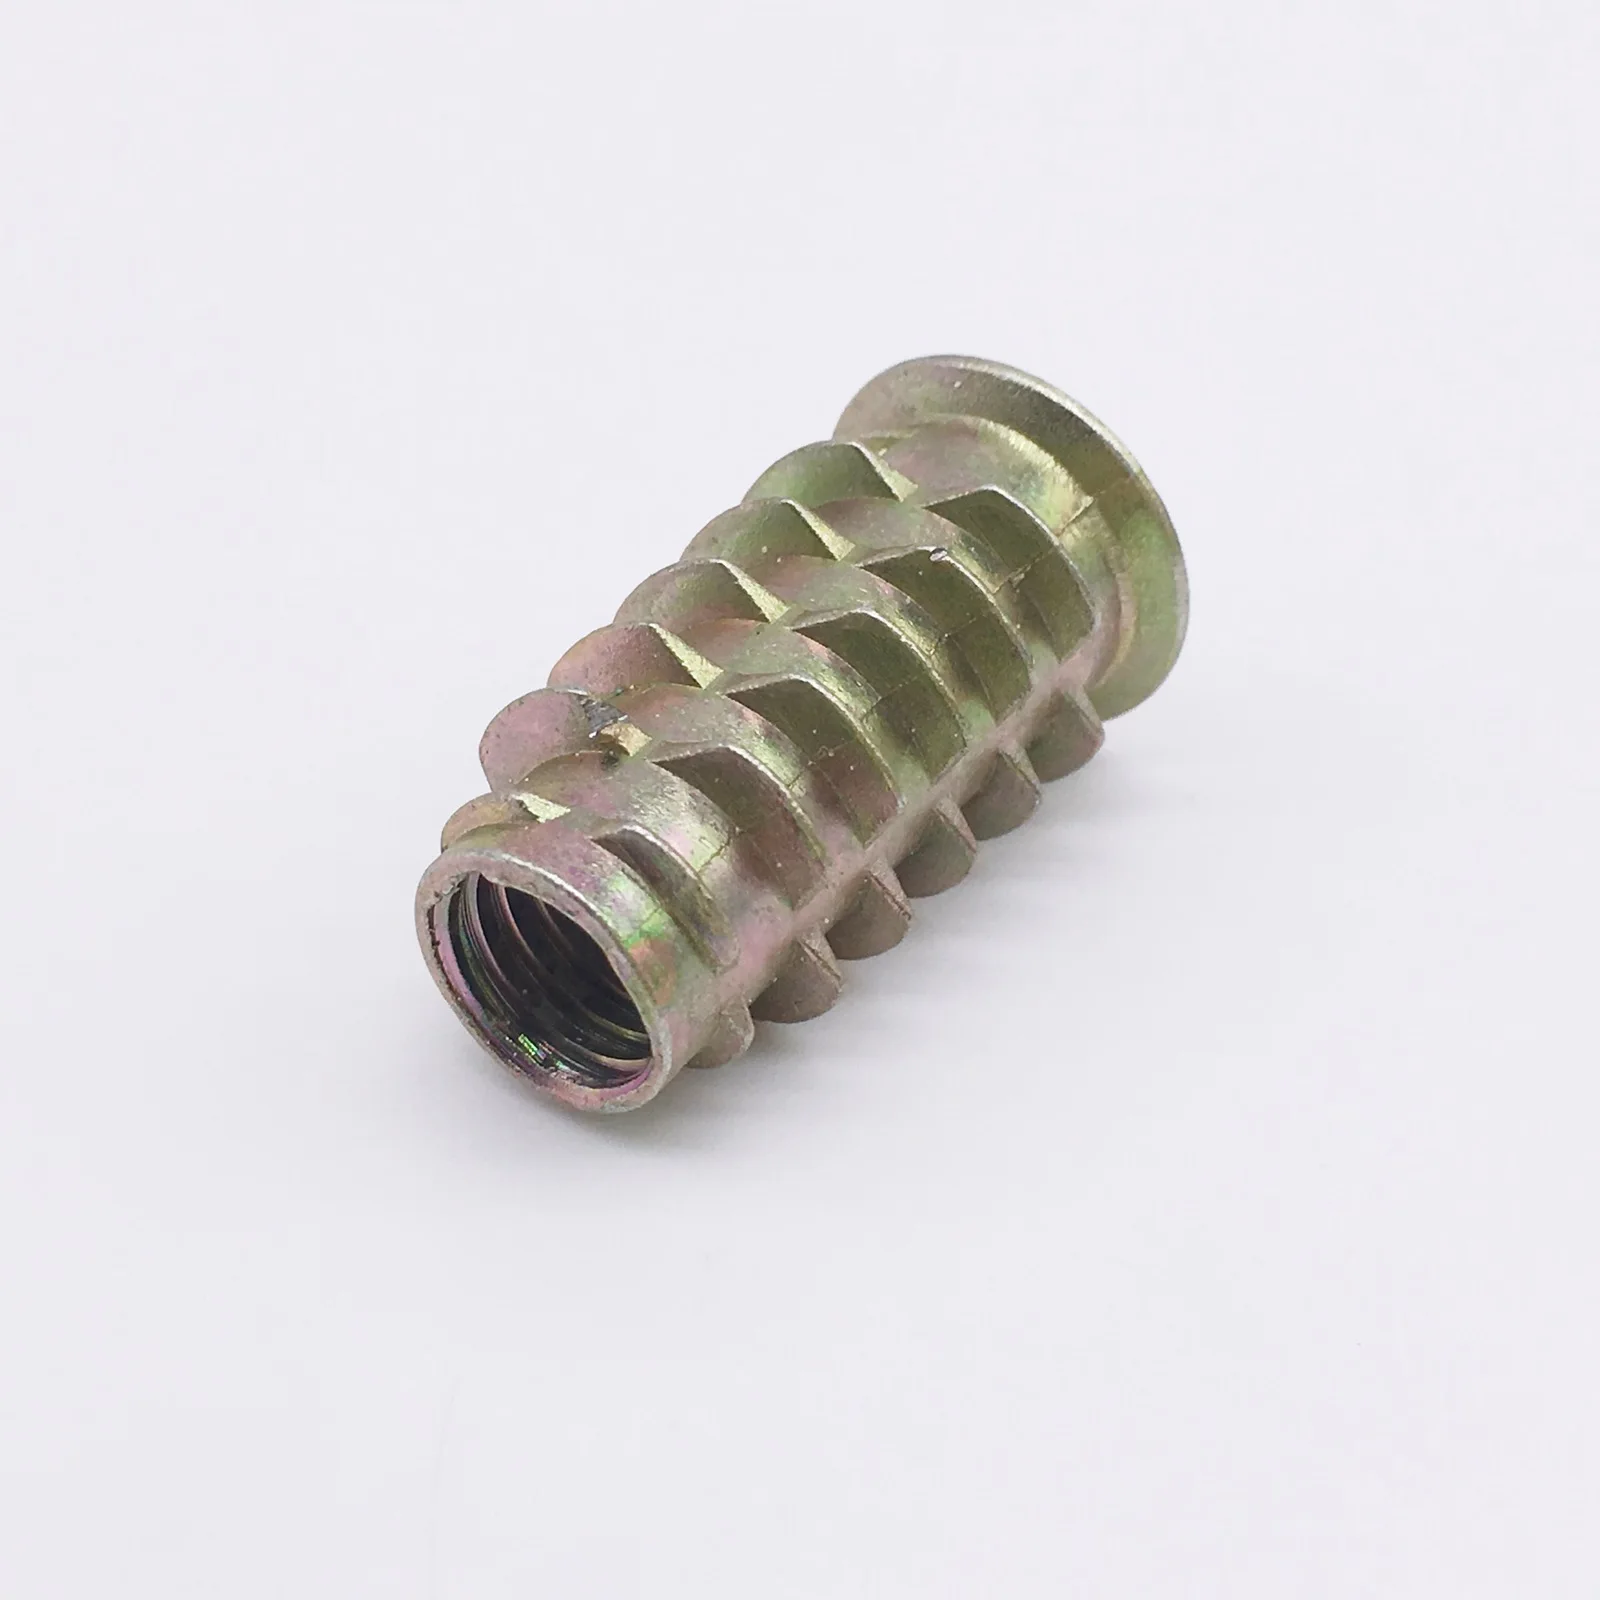 Details about   50pcs 1/4-20 Threaded Inserts for Wood Nut Inserts Furniture Screw Tool Steel 